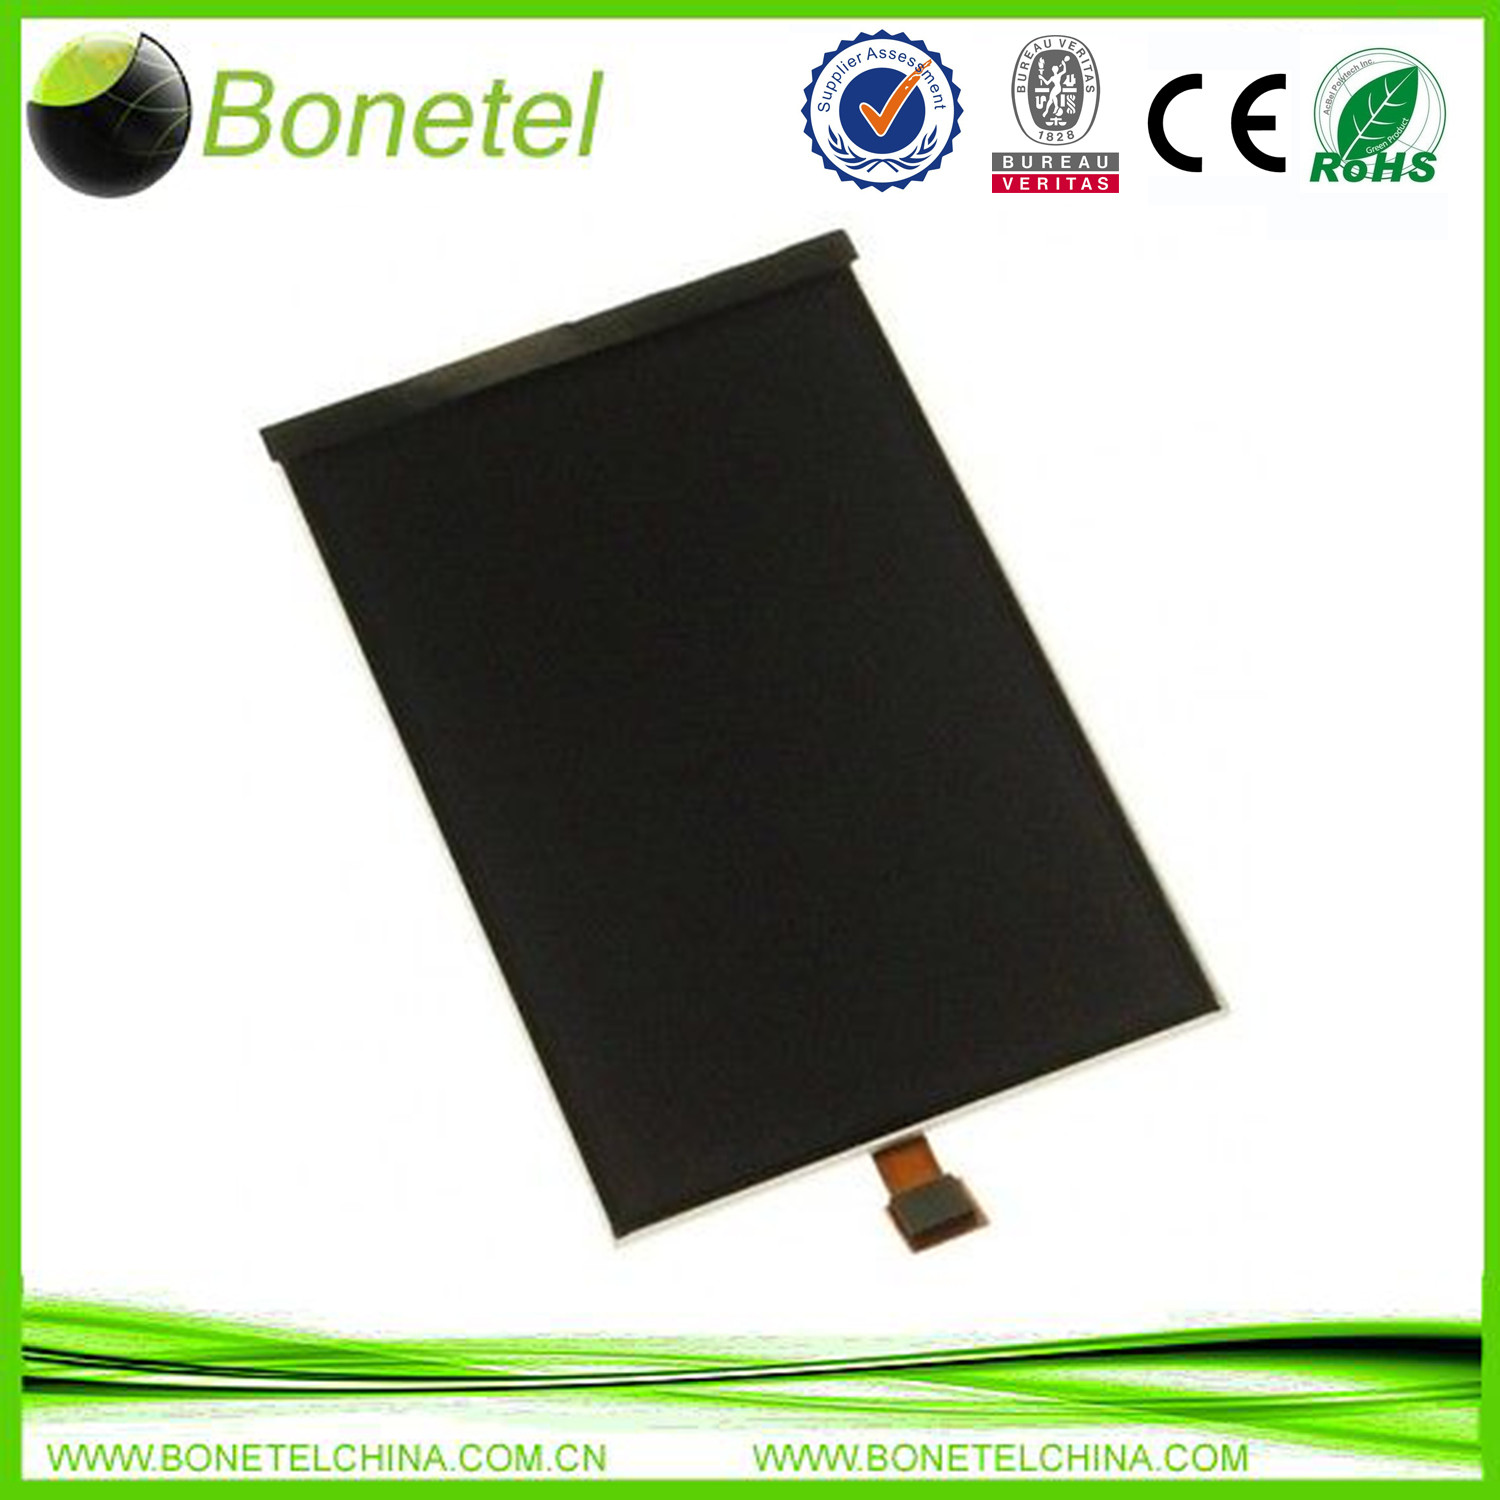 NEW LCD SCREEN DISPLAY For iPod Touch 3G 3rd GEN